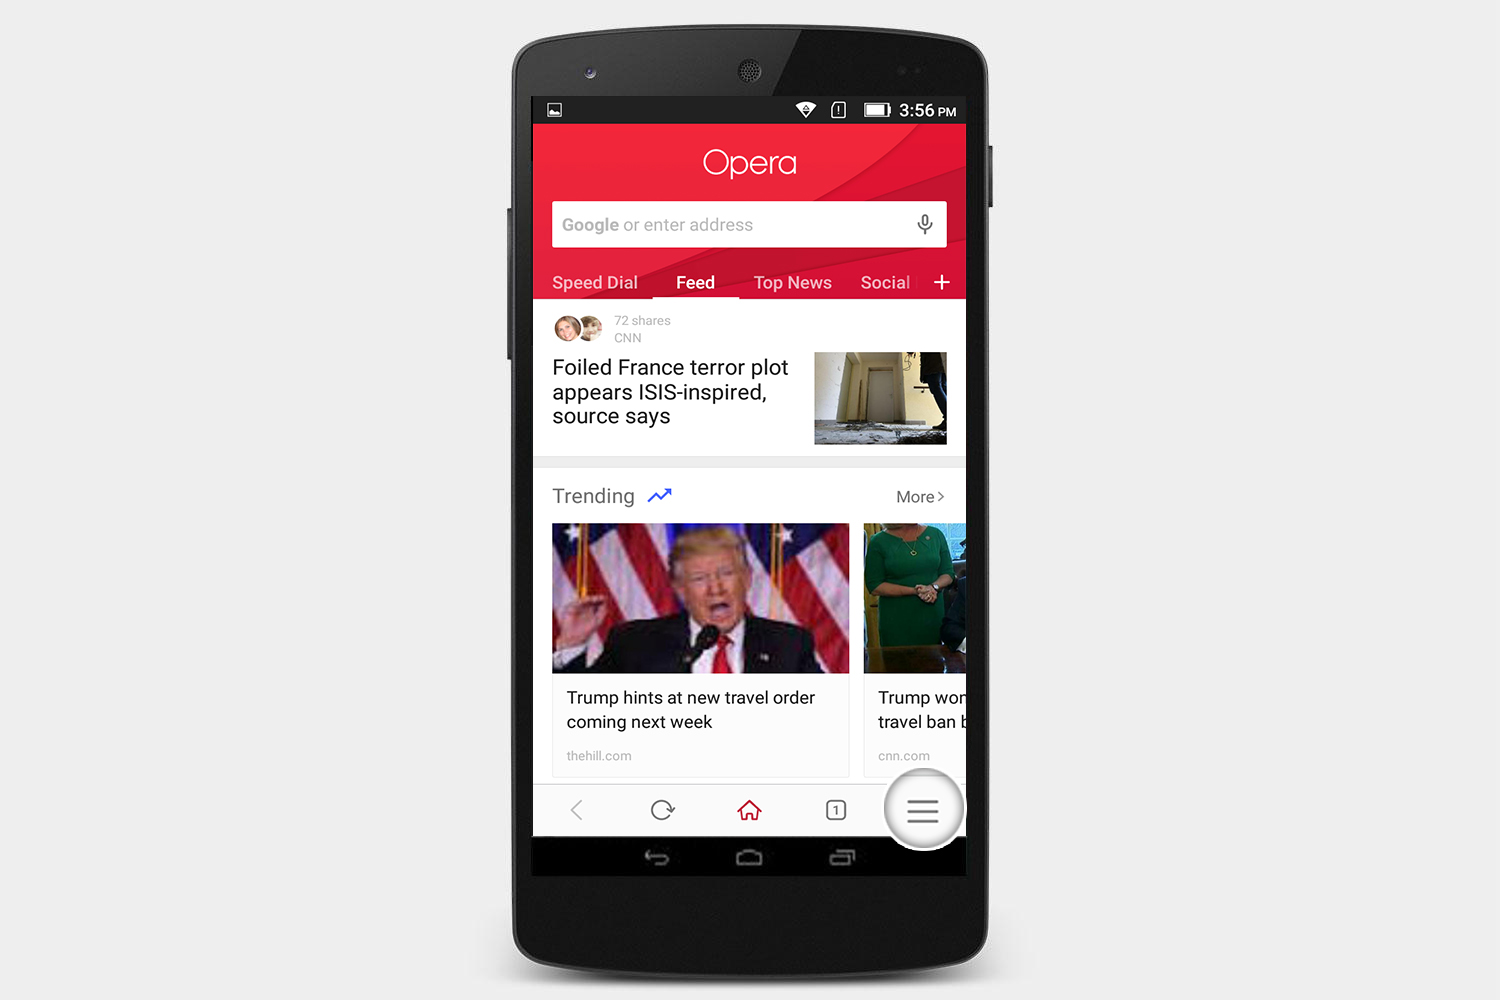 opera clear browsing data android